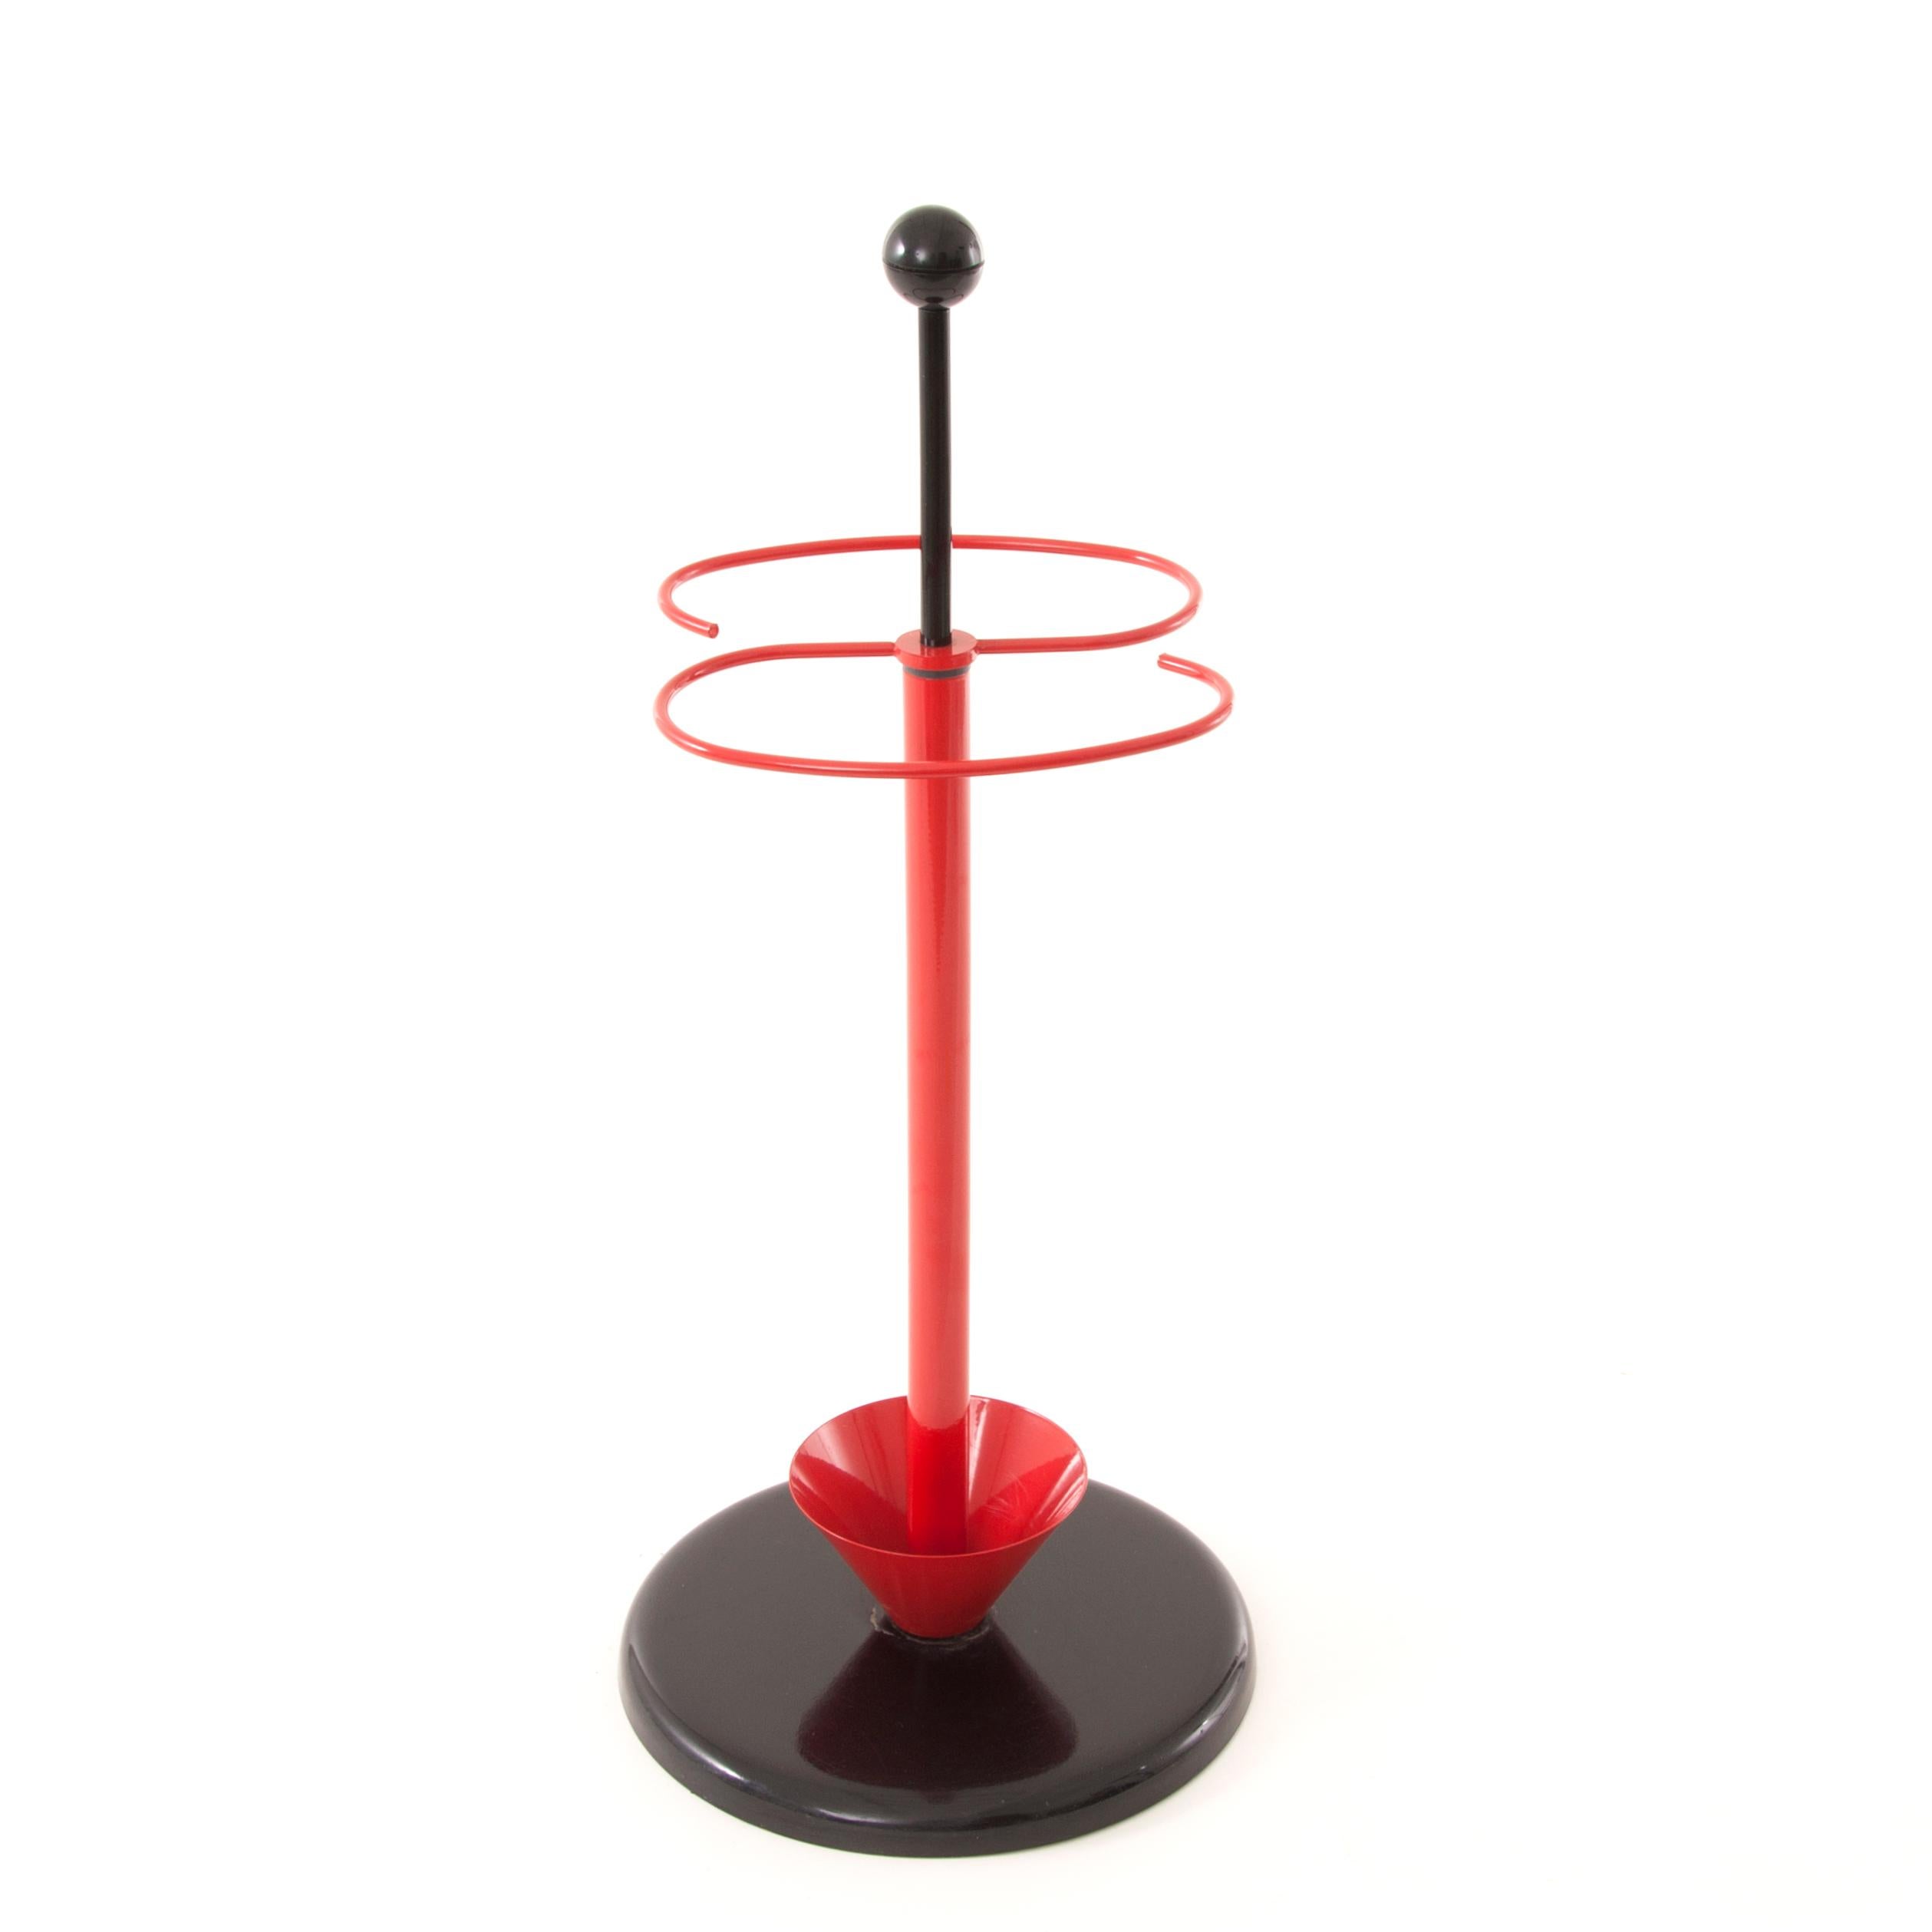 A beautiful red and black umbrella stand from the 1980s in the style of Servopluvio by Achille & Pier Giacomo Castiglioni / Memphis. Made of metal and plastic, in excellent condition.

 